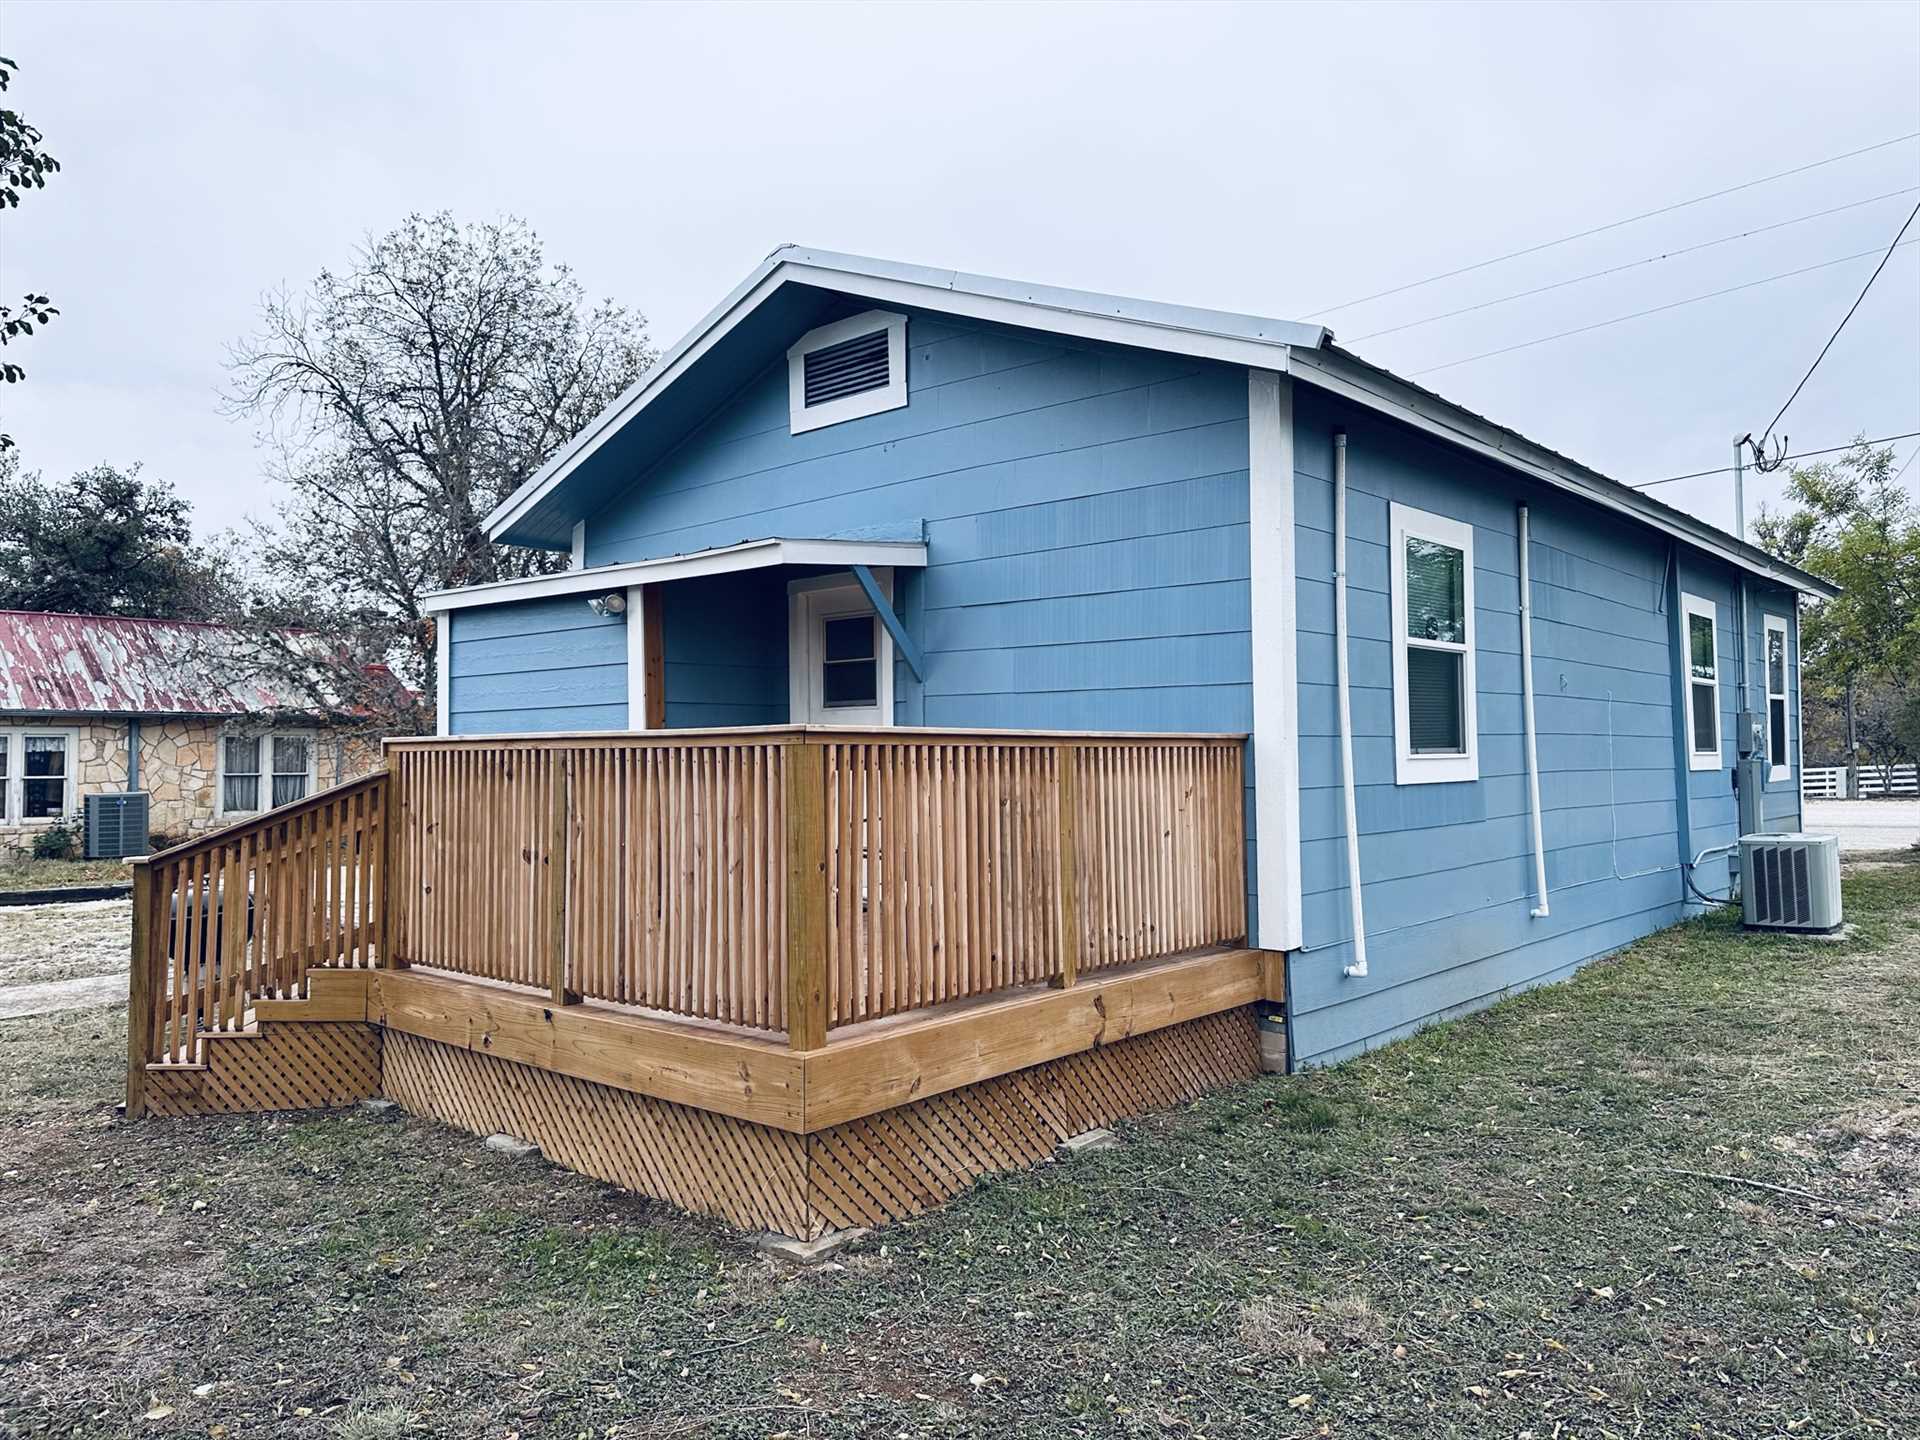                                                 Though this is an exterior shot of this pretty blue vacation home, it also shows the modern and efficient central air unit that keeps the inside just right!